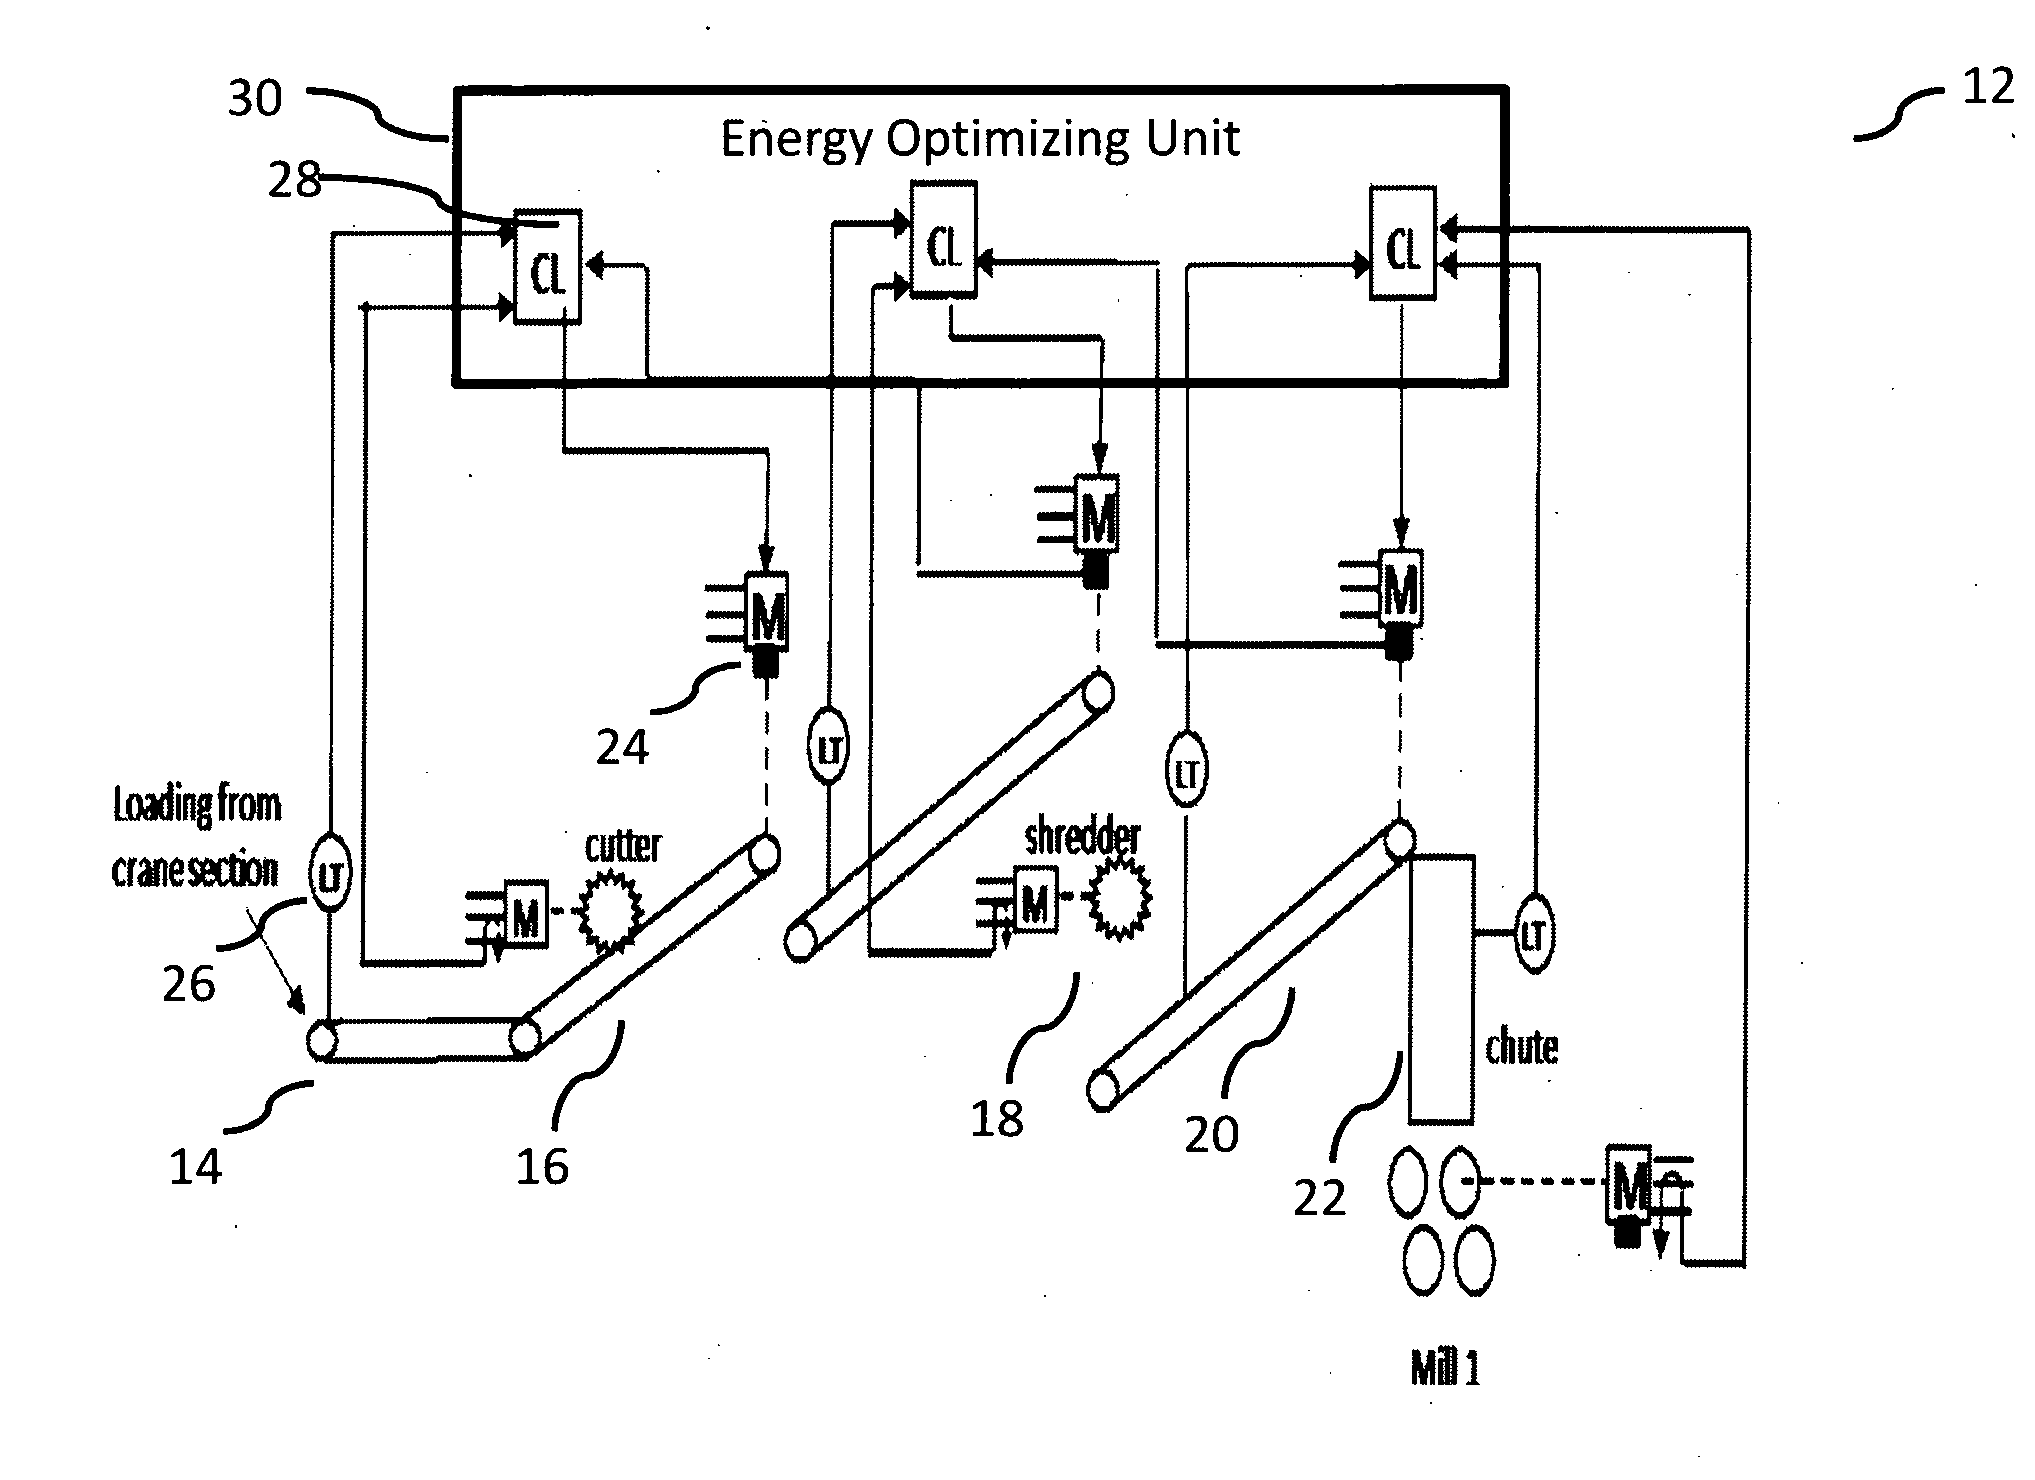 Cane preparation unit and method of operation